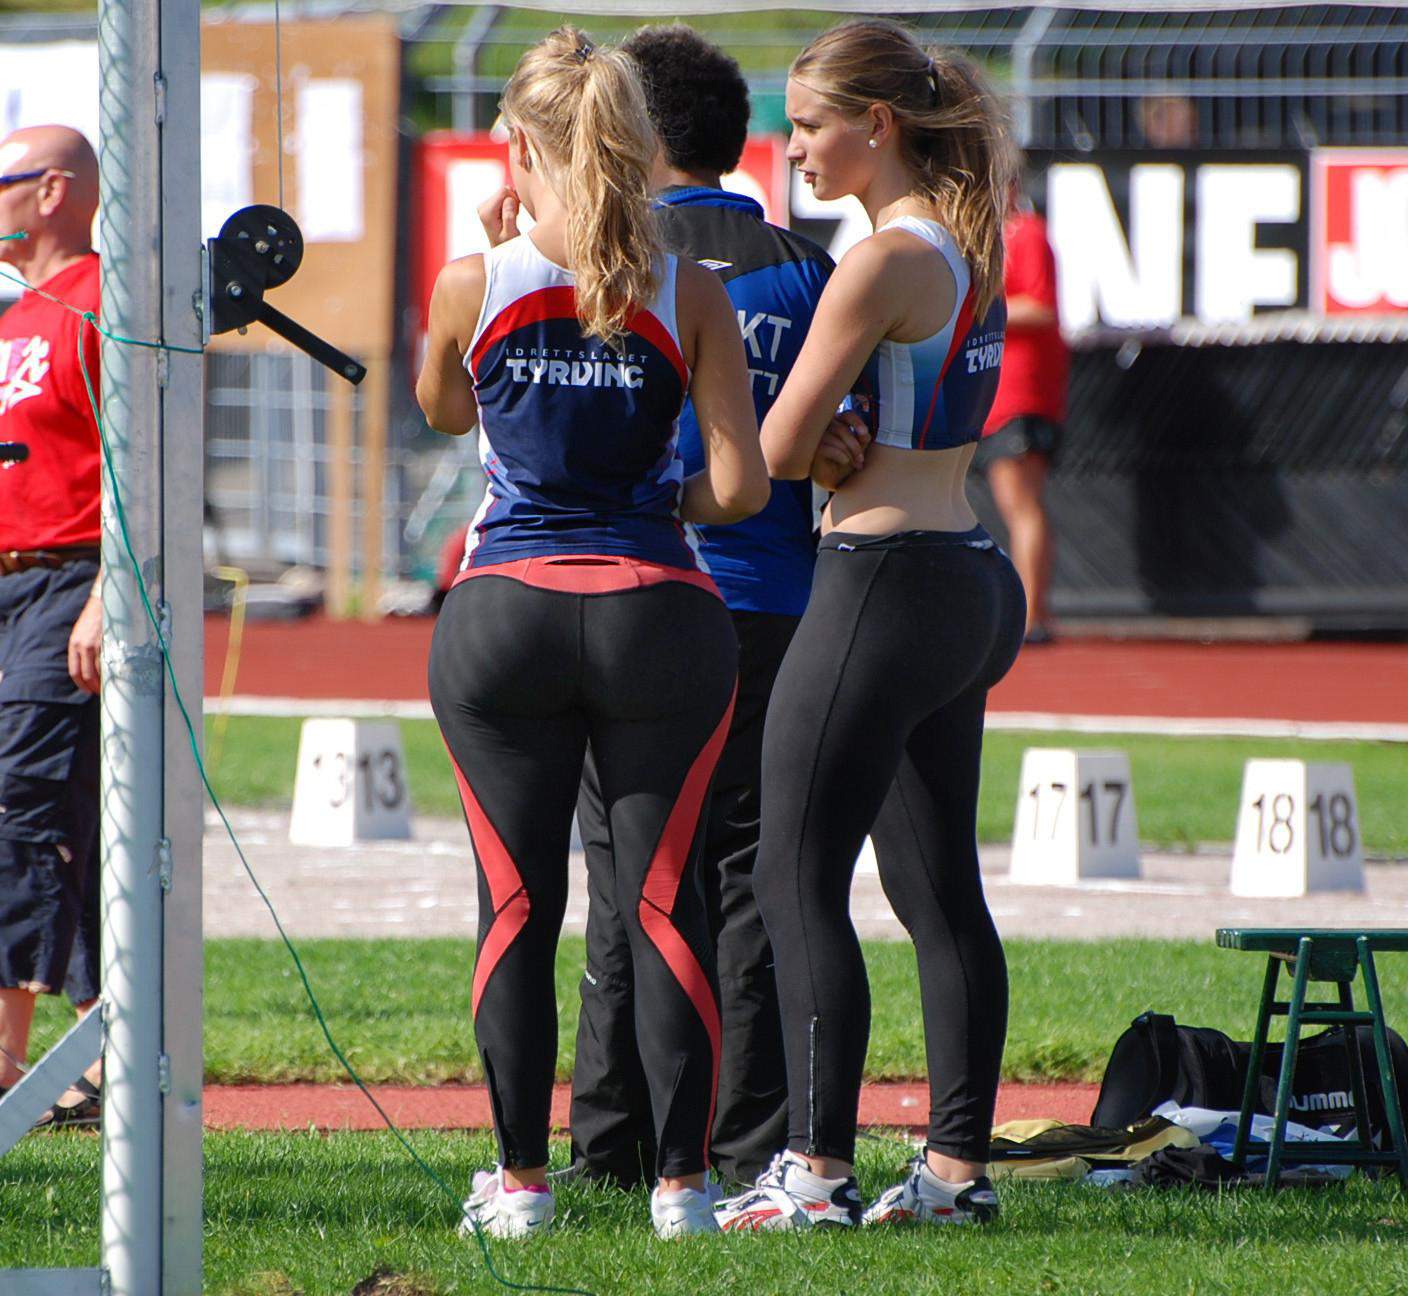 Ass Track Beautiful Porn - MIND BLOWING TRACK AND FIELD BOOTY - GirlsInYogaPants.com